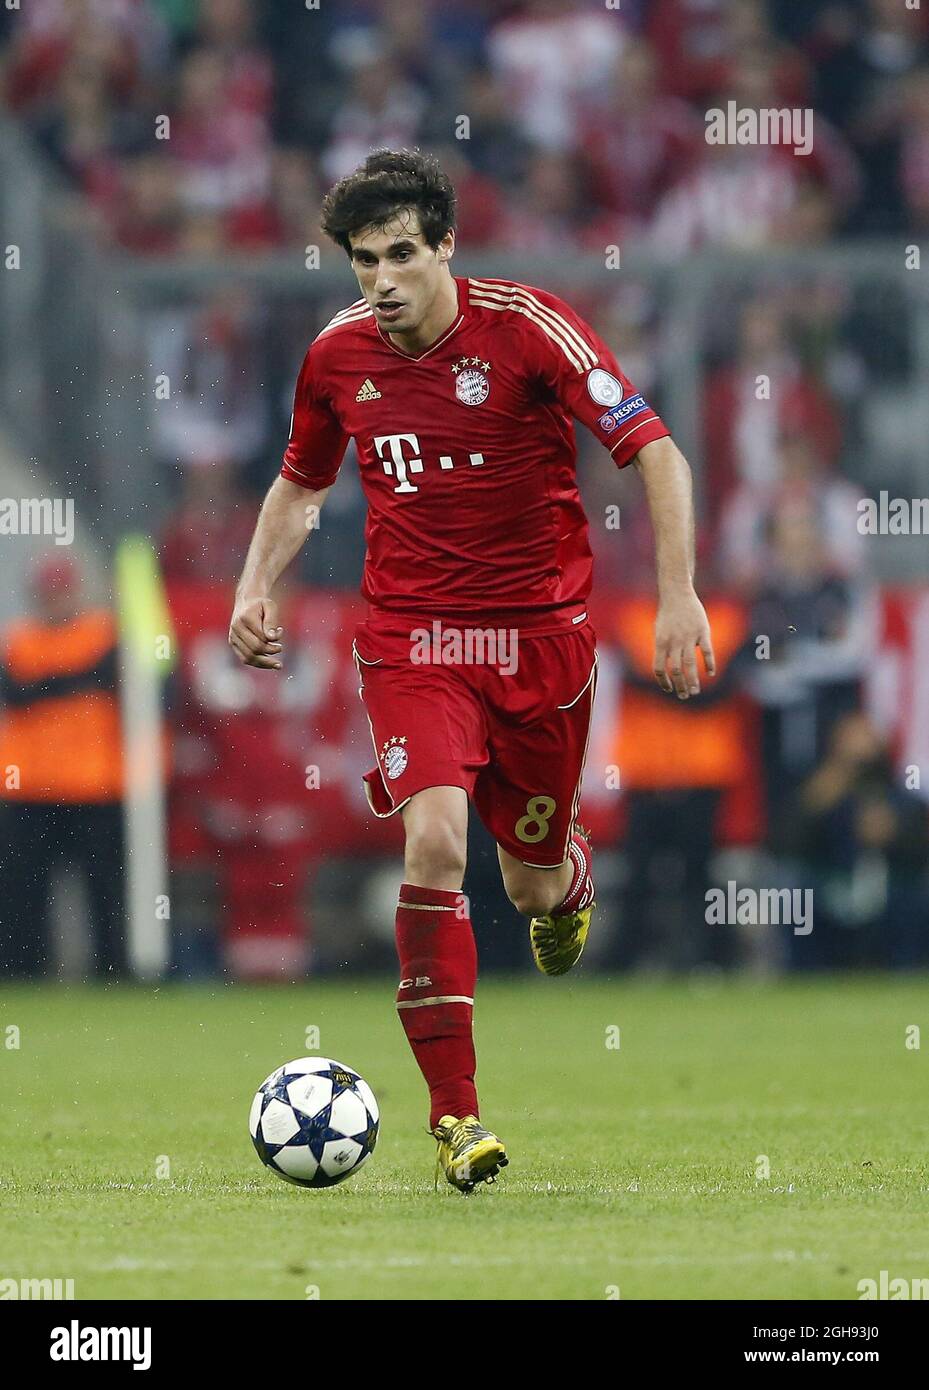 Munich's Javi Martinez in action during the League Cup Semi Final 1st Leg match between Bayern Munich and Barcelona at the Allianz Arena in Munich on April 23, 2013. Picture: David Klein Stock Photo